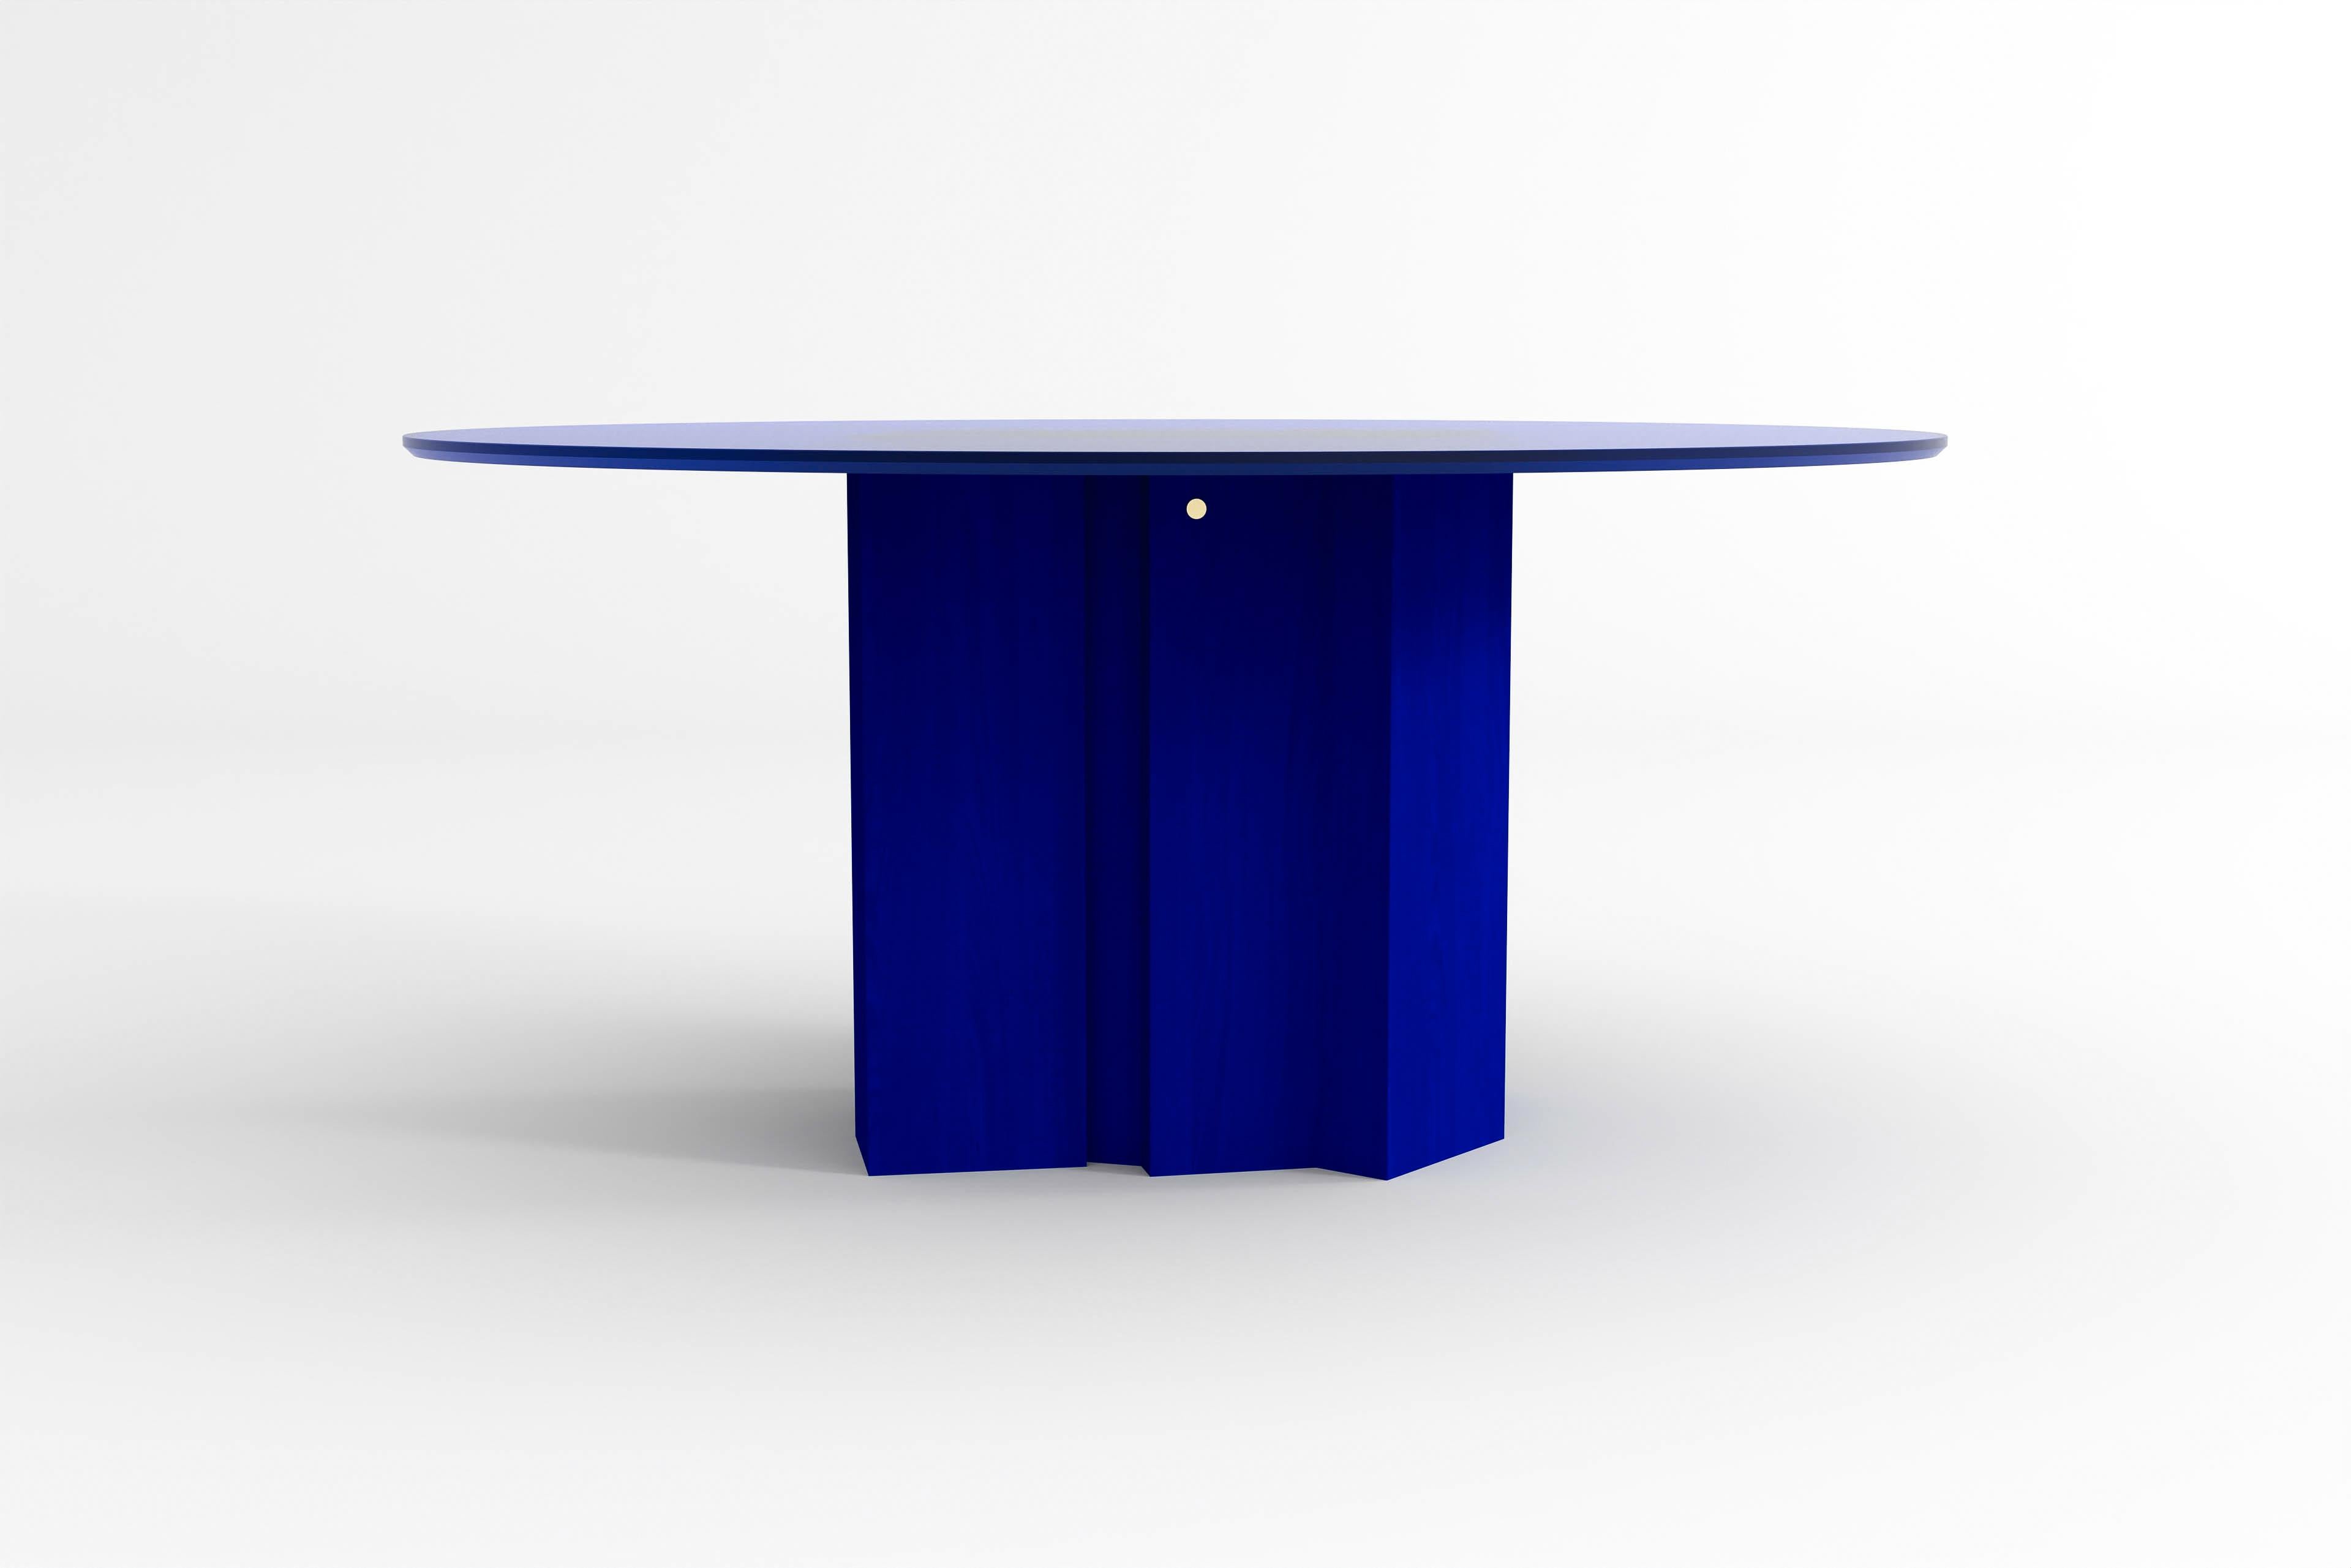 Our barh beam table deserves being in the center of attention. The heavy, robust and stable base contrasts stunningly with the elegantly thin and fragile table top. The architectural character of the central leg excites the mind along all sides.